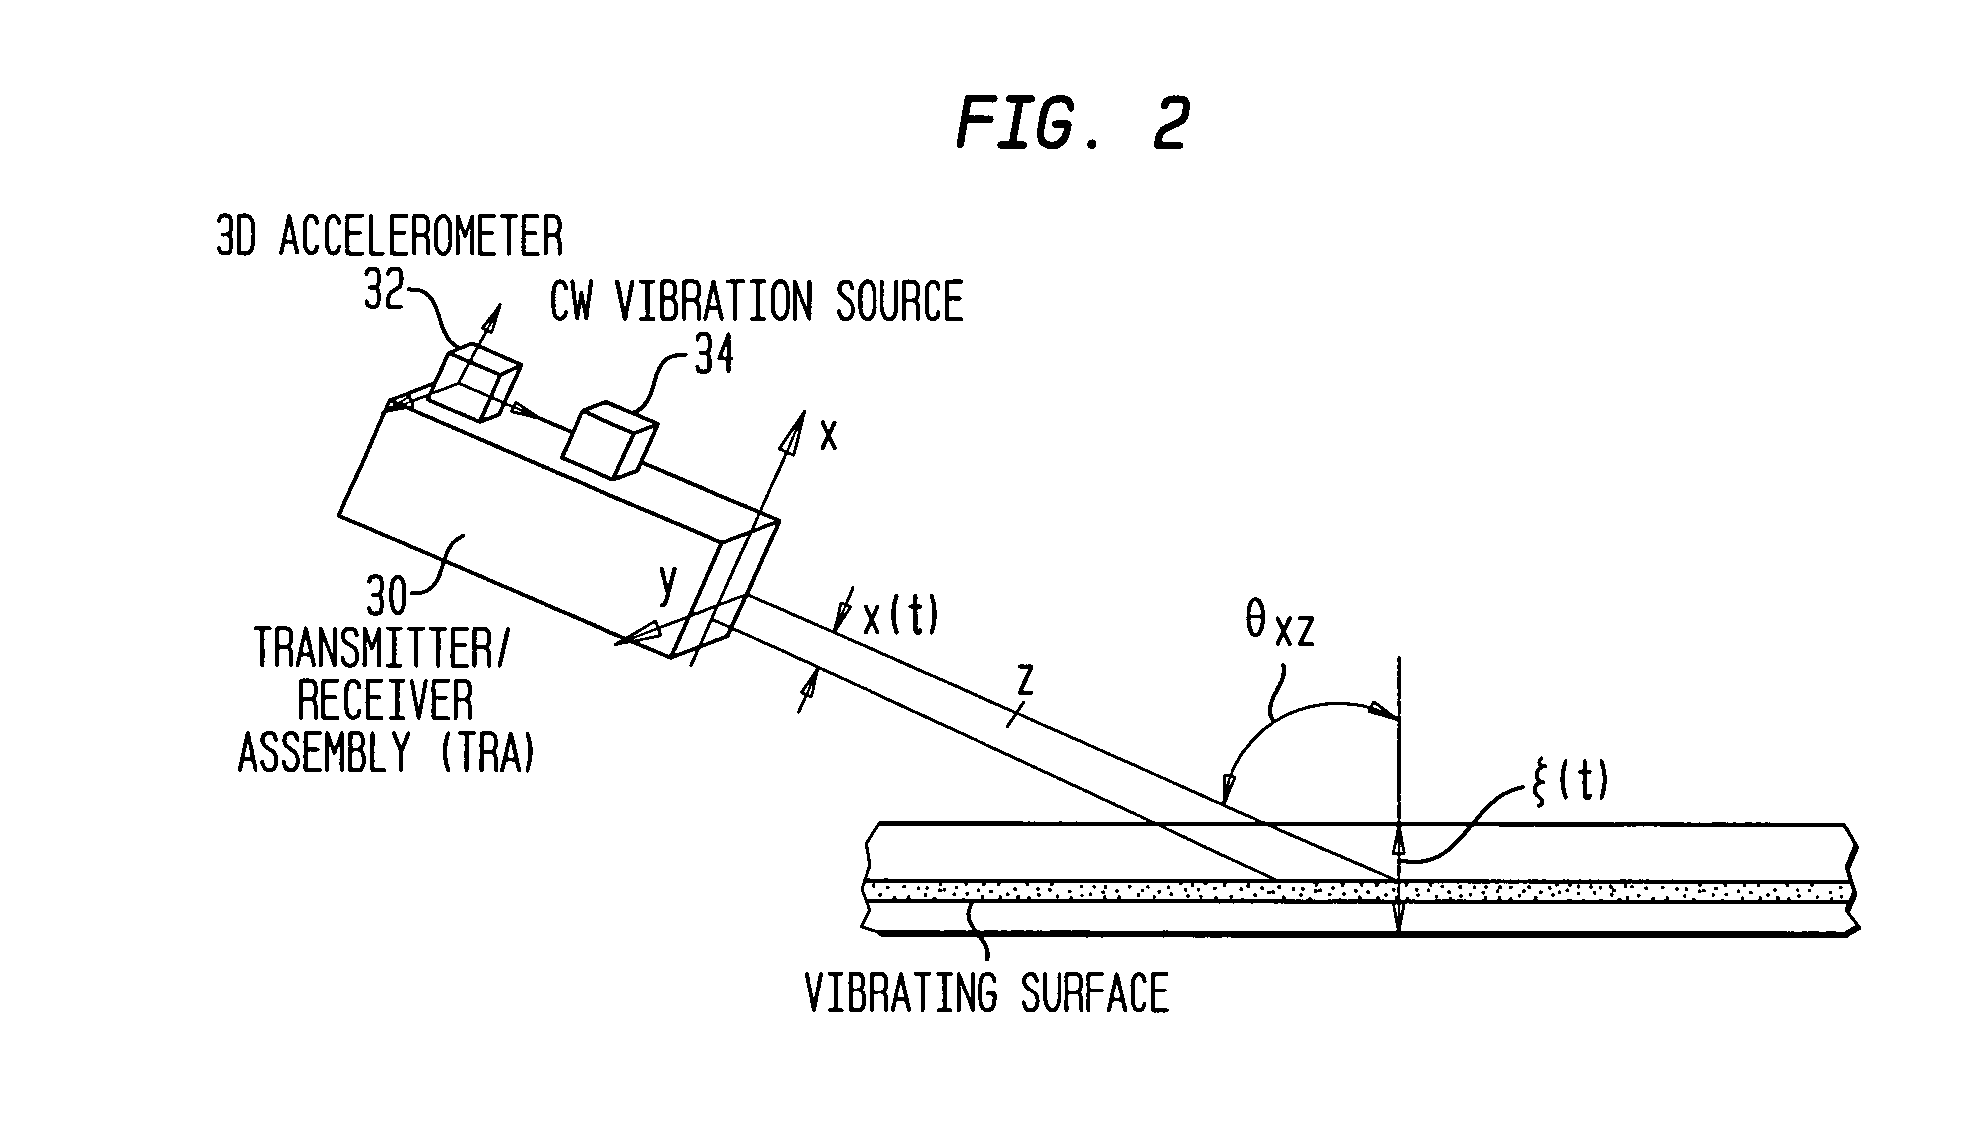 Method and apparatus for remote measurement of vibration and properties of objects